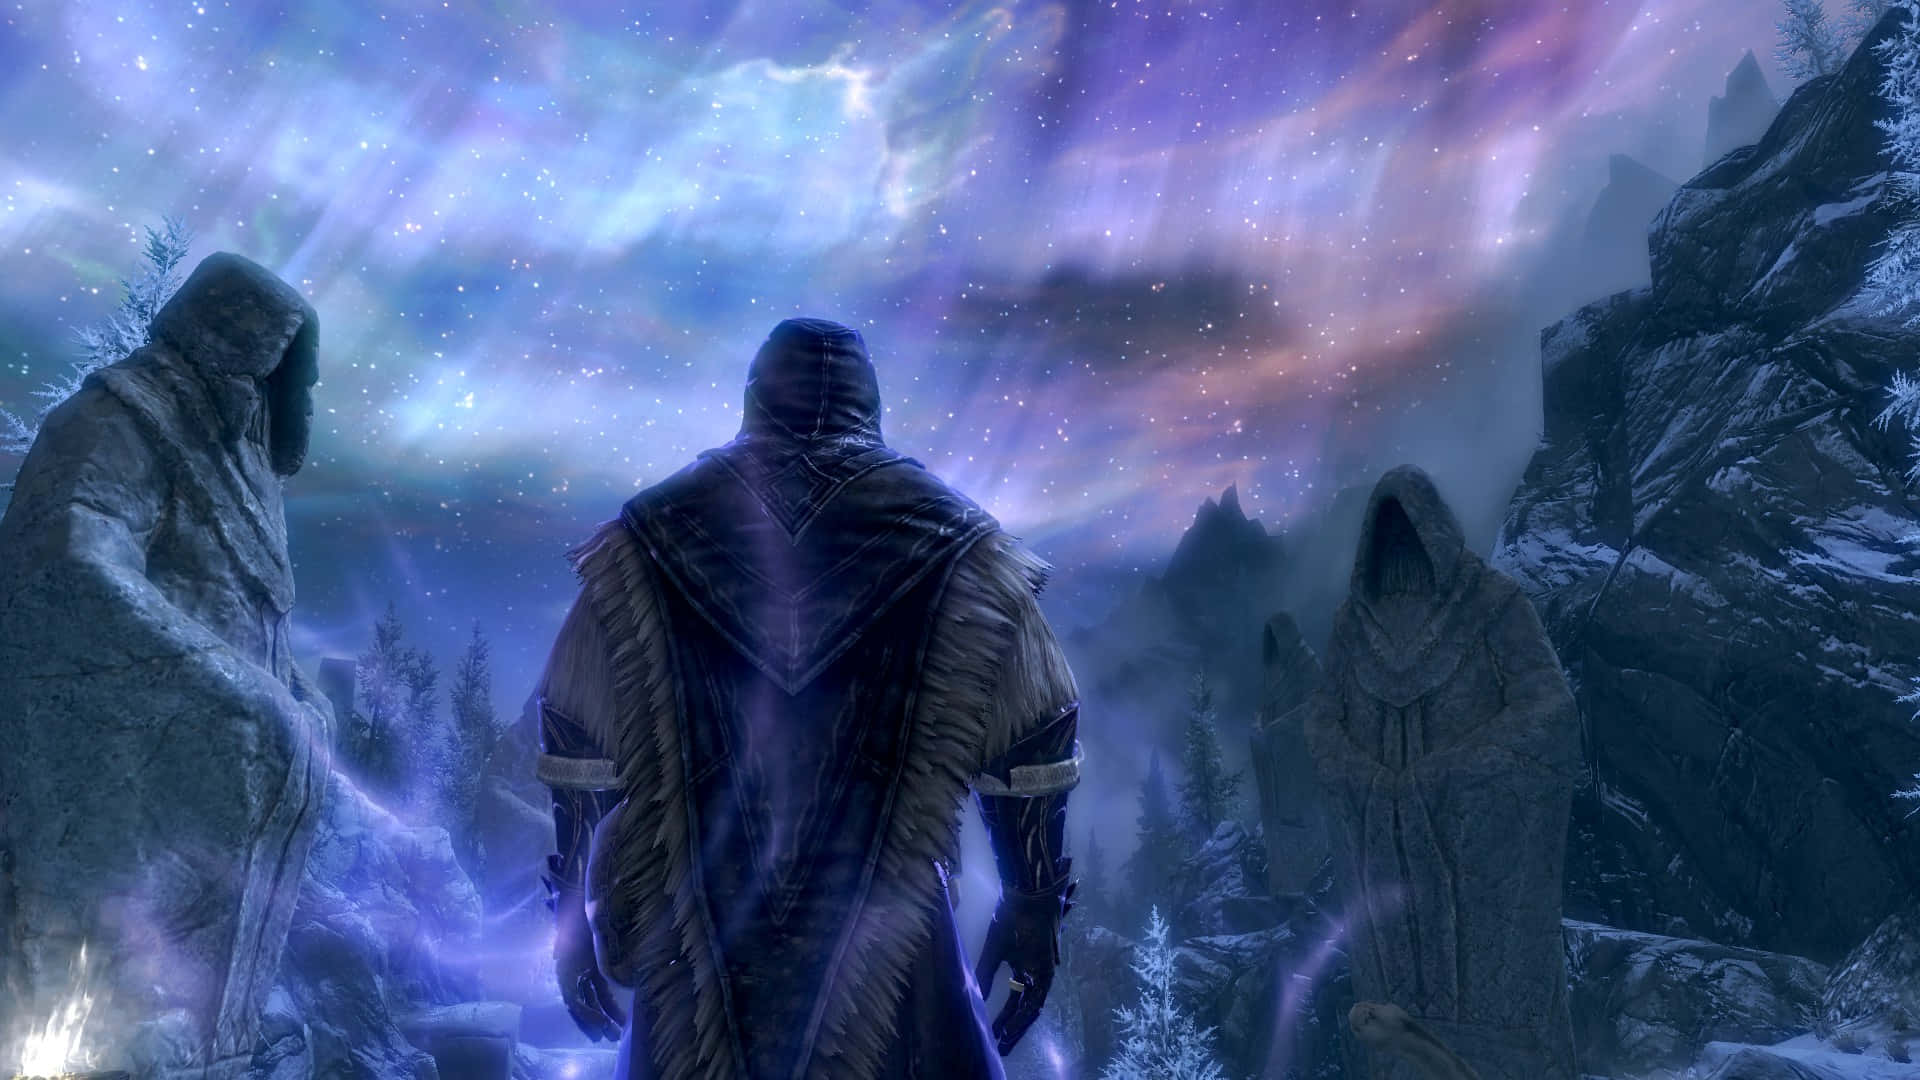 Majestic view of Sovngarde in the Elder Scrolls universe Wallpaper